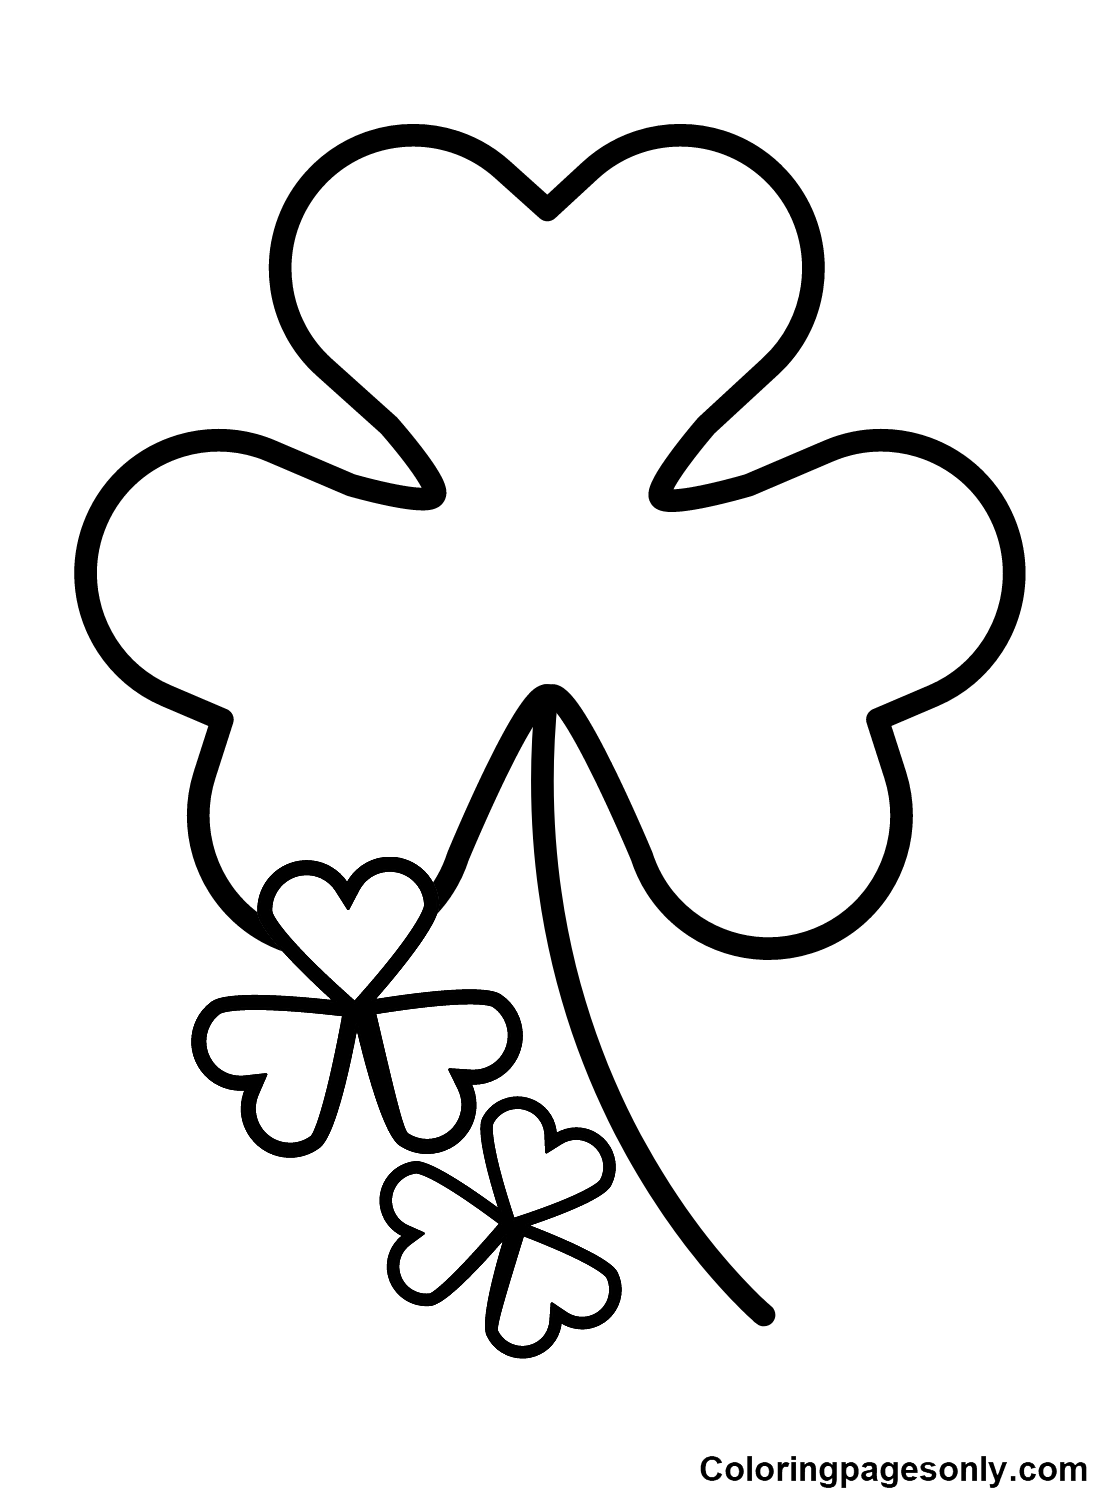 Free Shamrock Coloring Pages